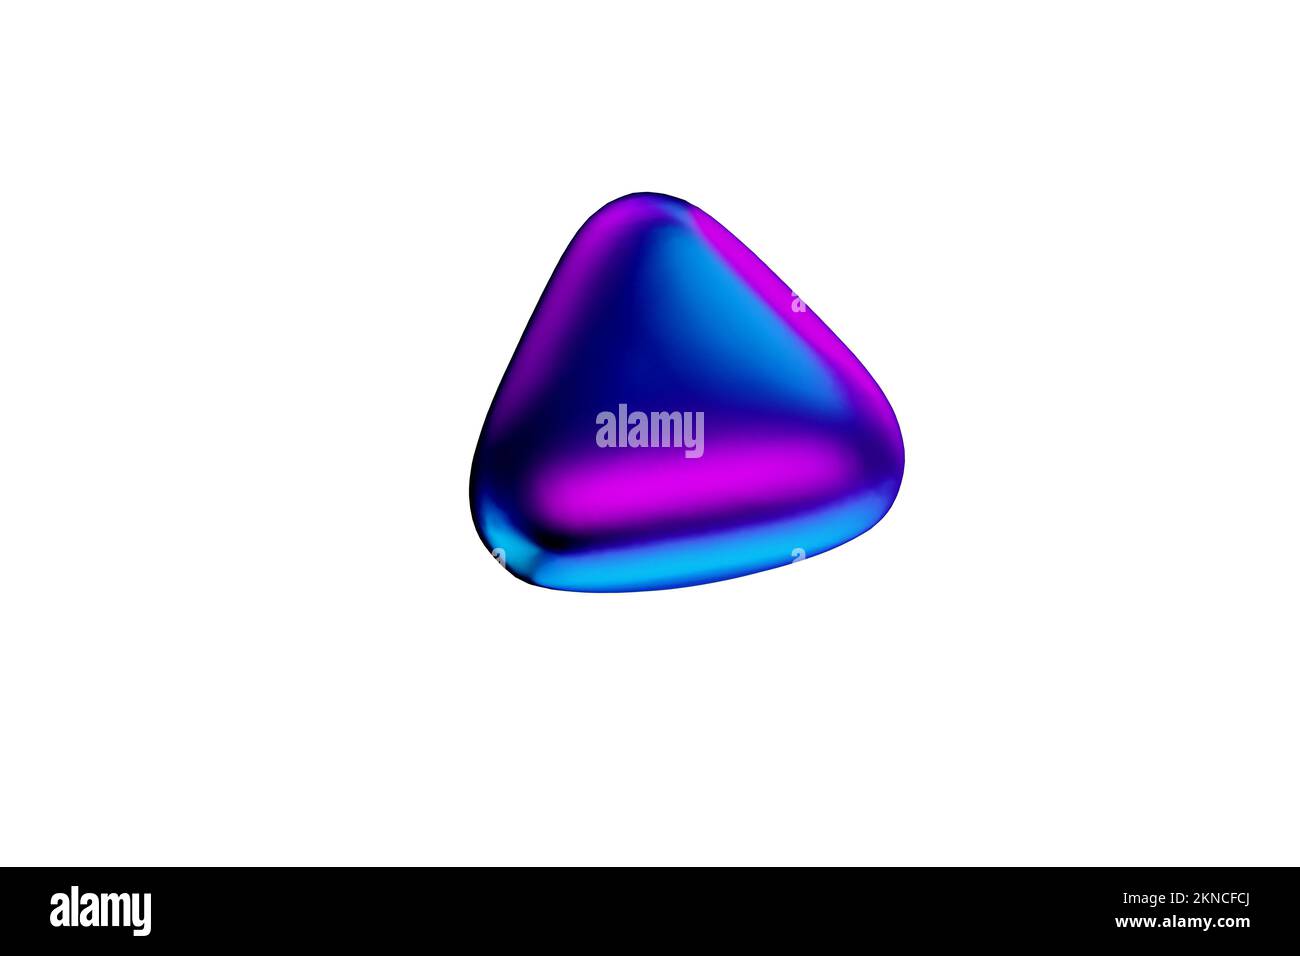 Triangular abstract shape in gradient colors 3d render. Stock Photo